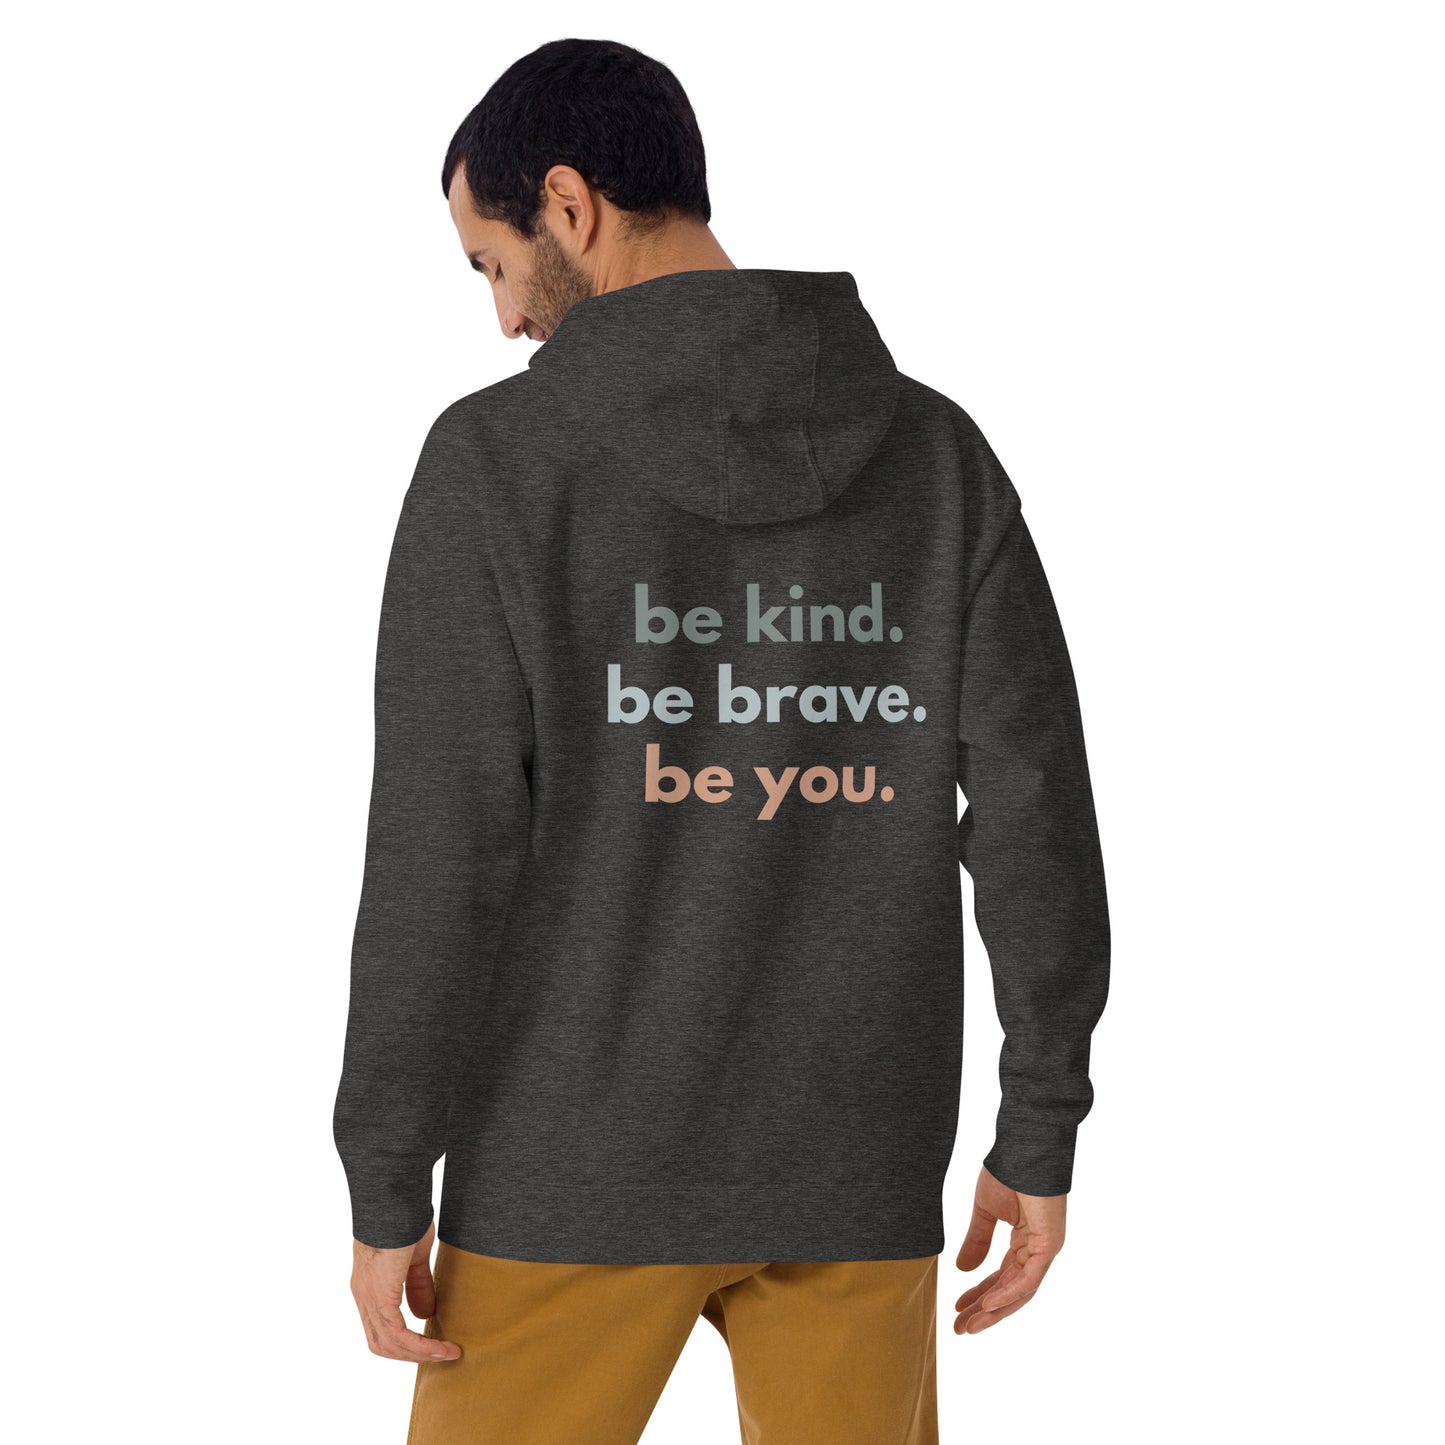 Unisex Hoodie - be kind. be brave. be you. (back)